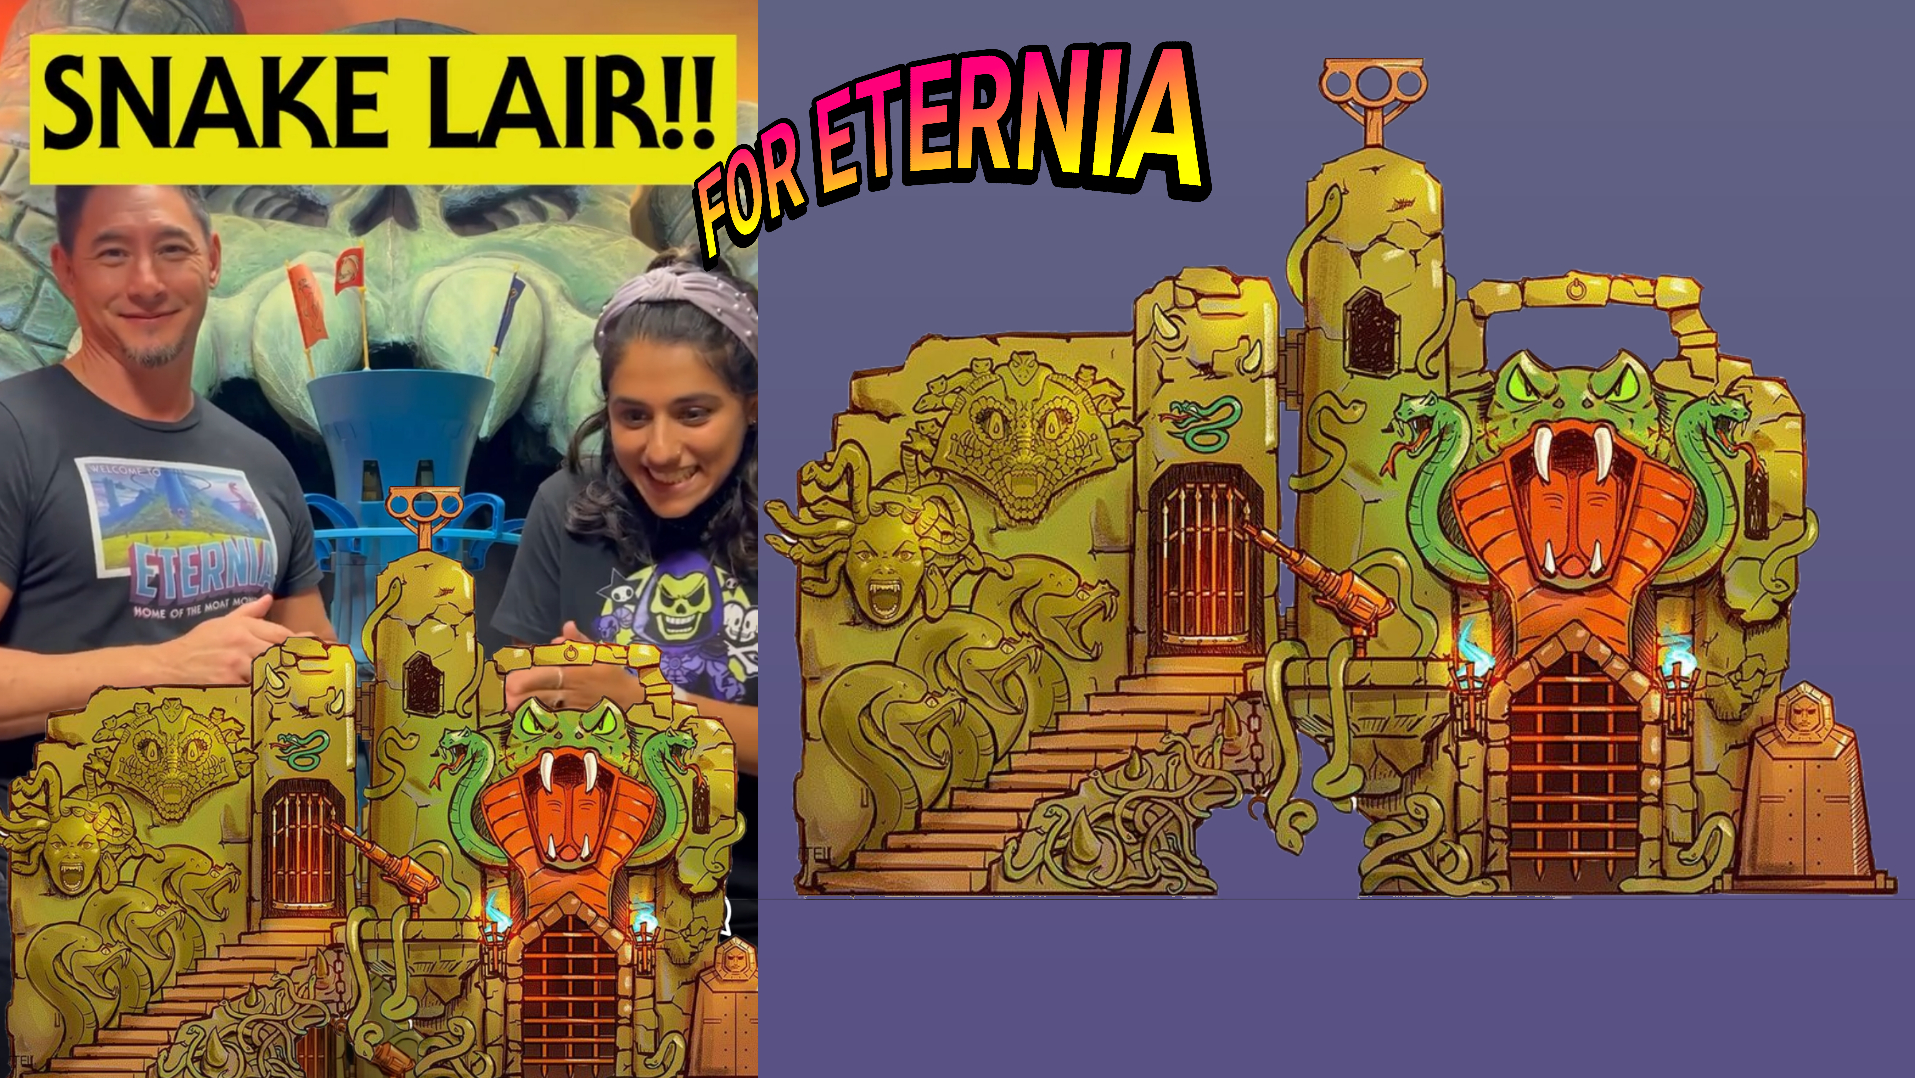 The Eternia’s Choice Winner has been finally revealed as the SNAKE LAIR!